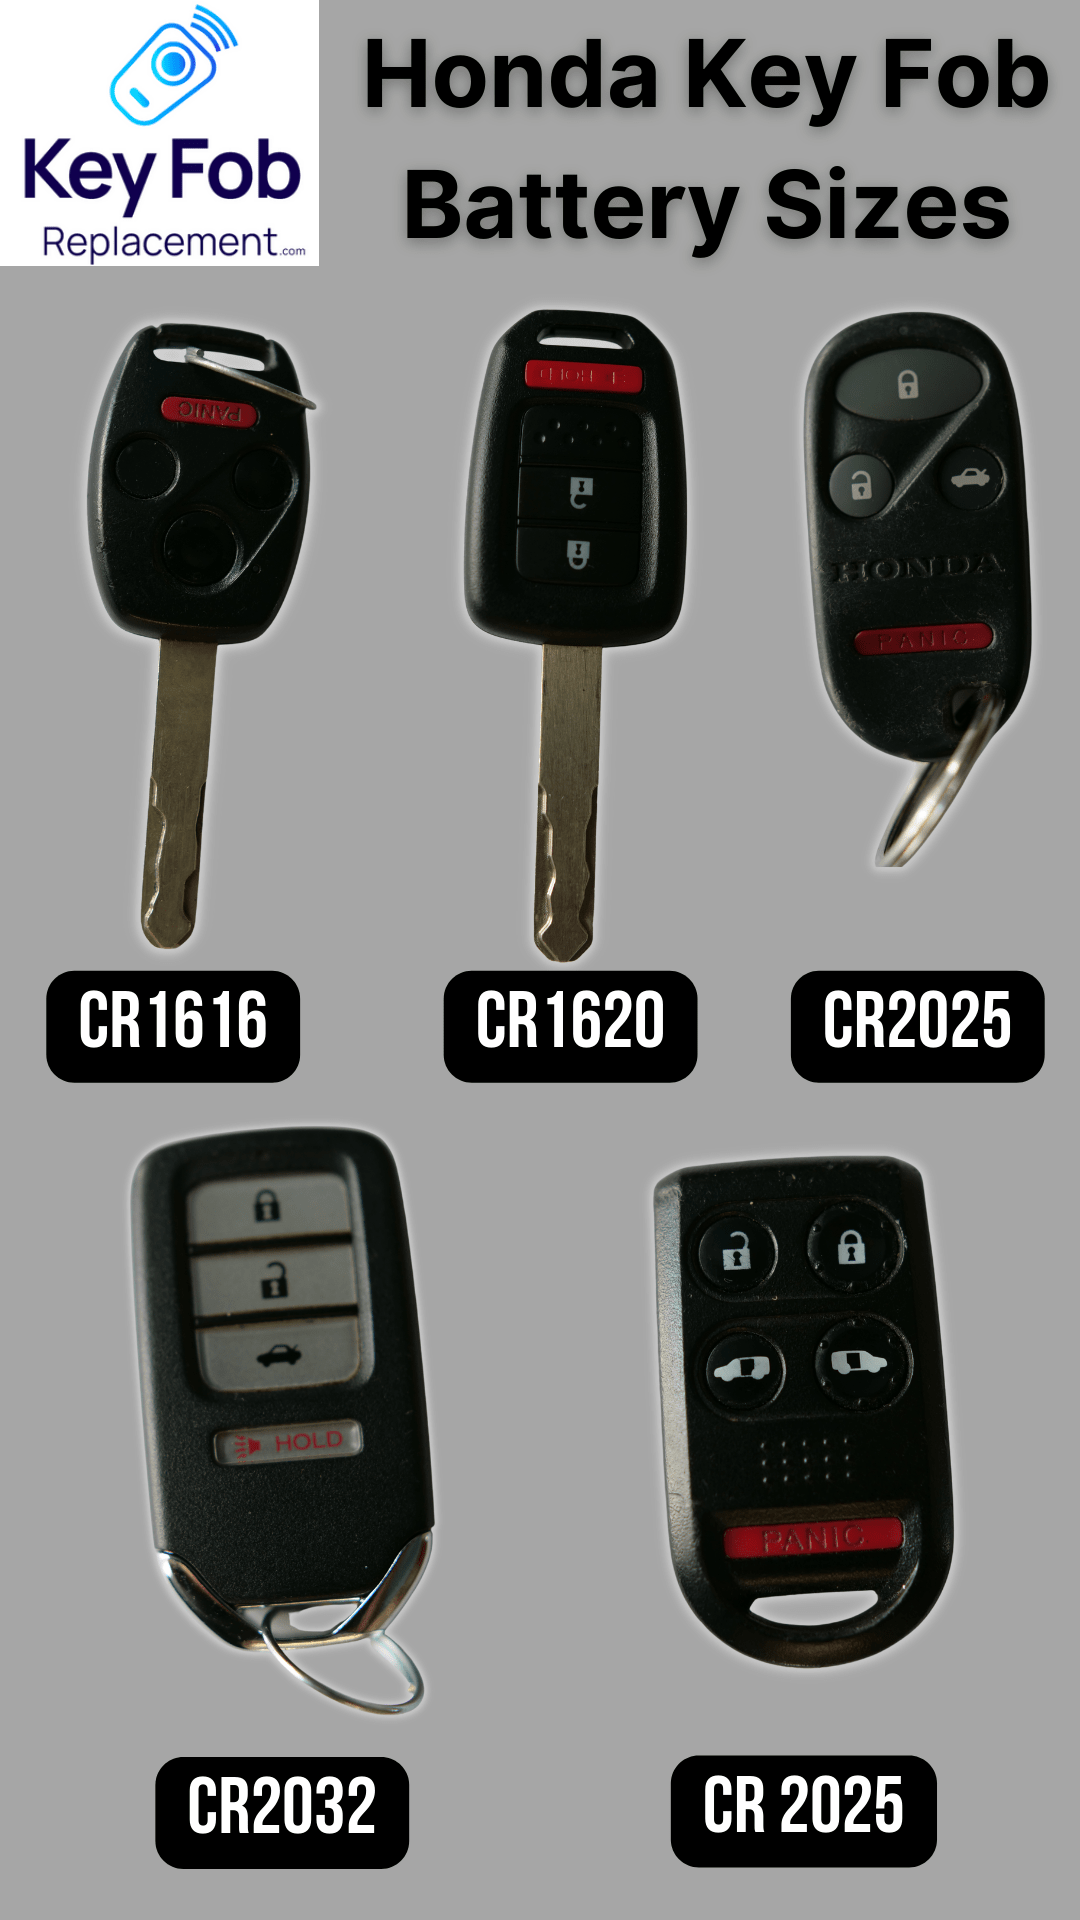 These are the 5 Most common Honda Key Fobs and the batteries inside.